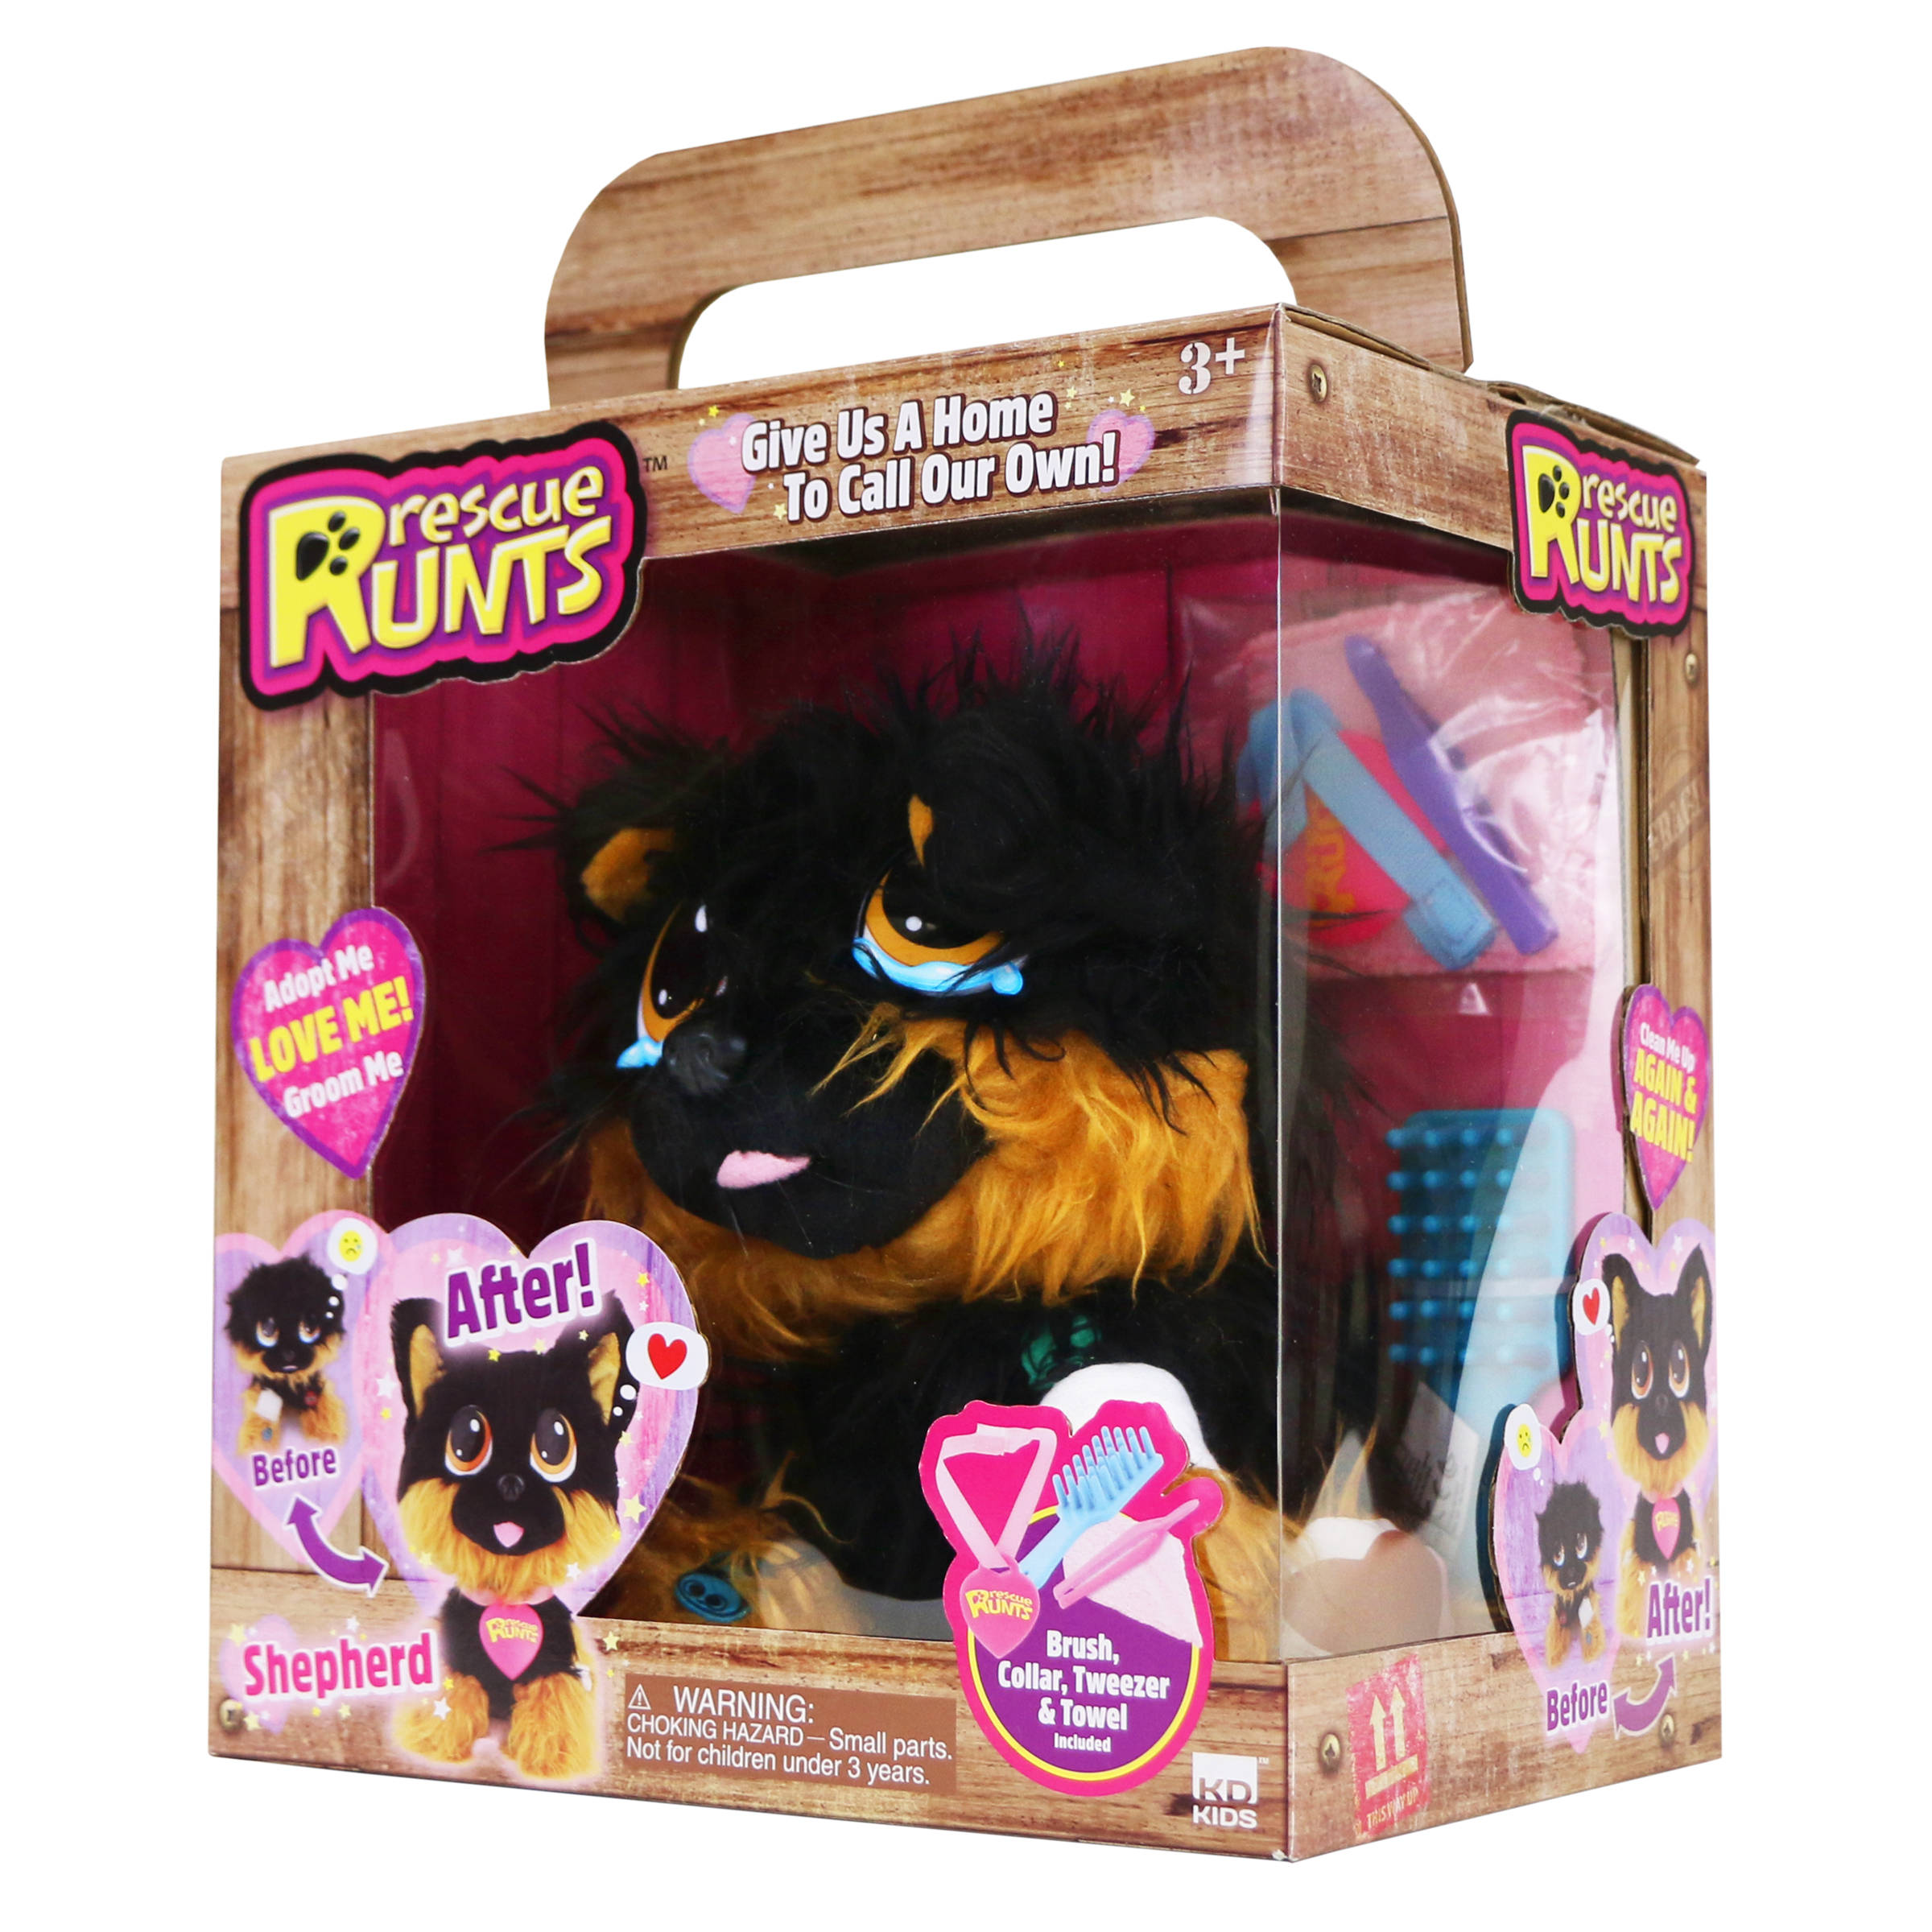 Rescue runts shepherd rescue dog plush by kd kids - image 7 of 8